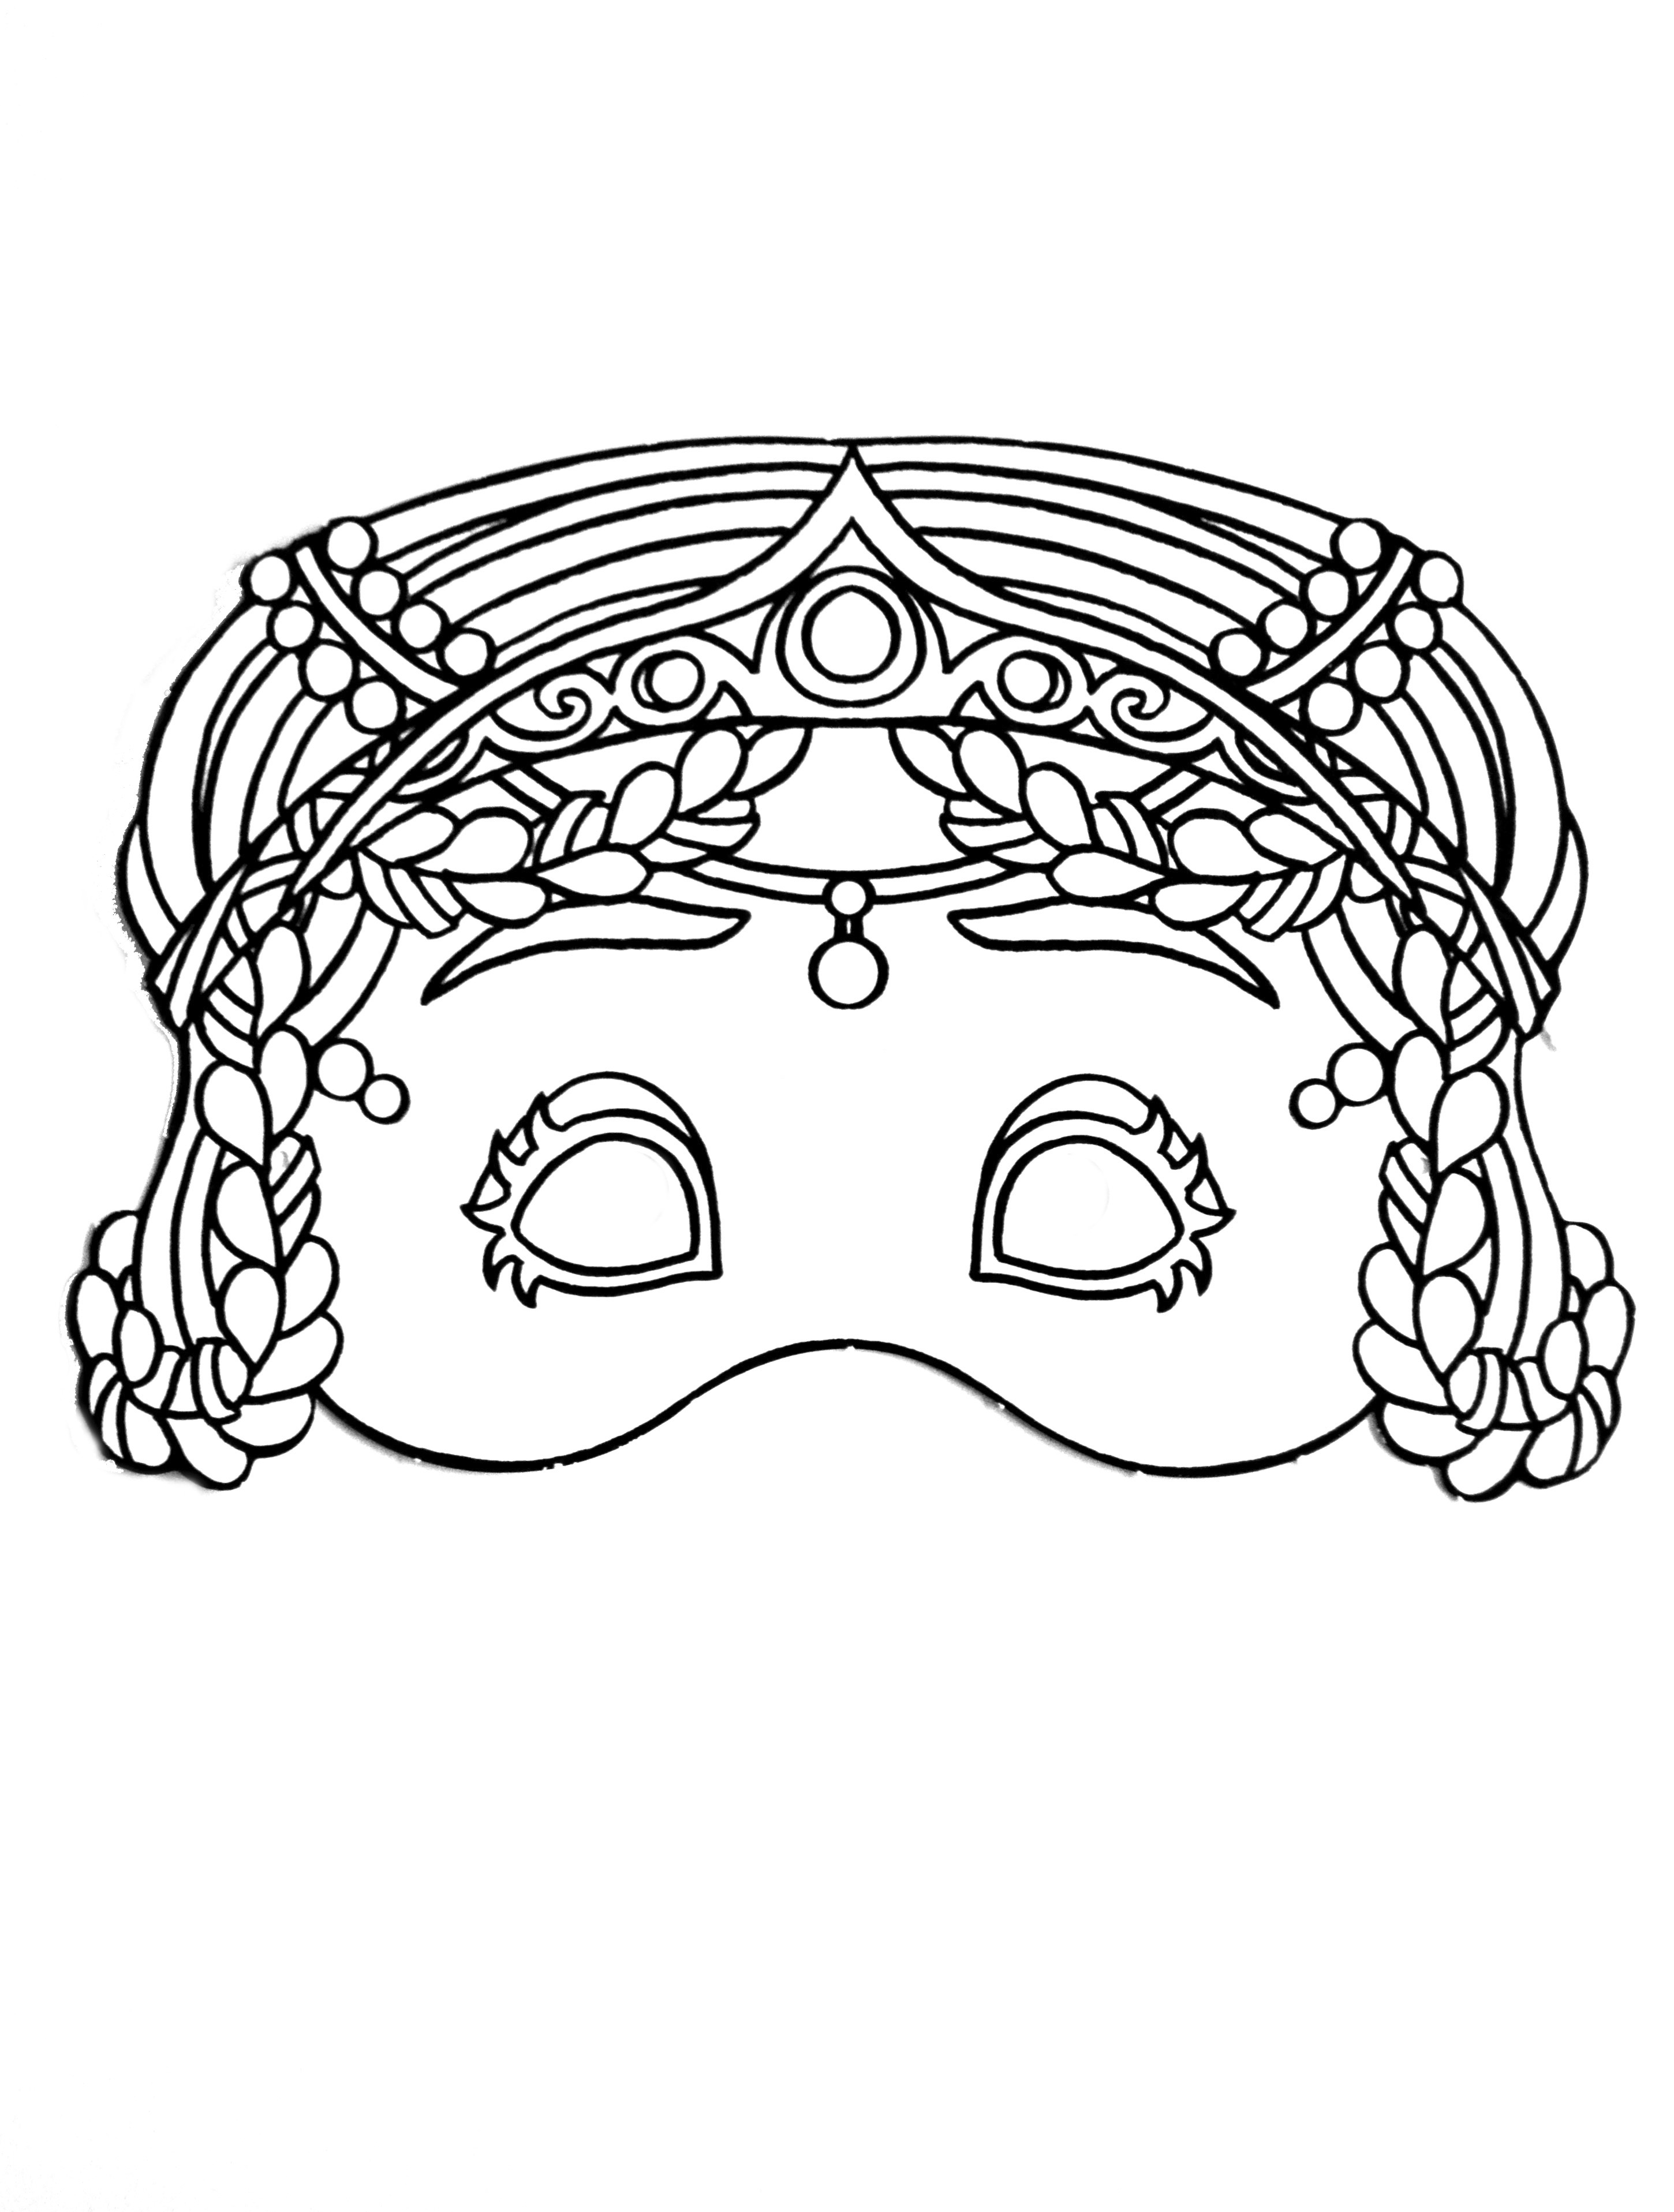 Carnival Mask for kids to print & color - 2